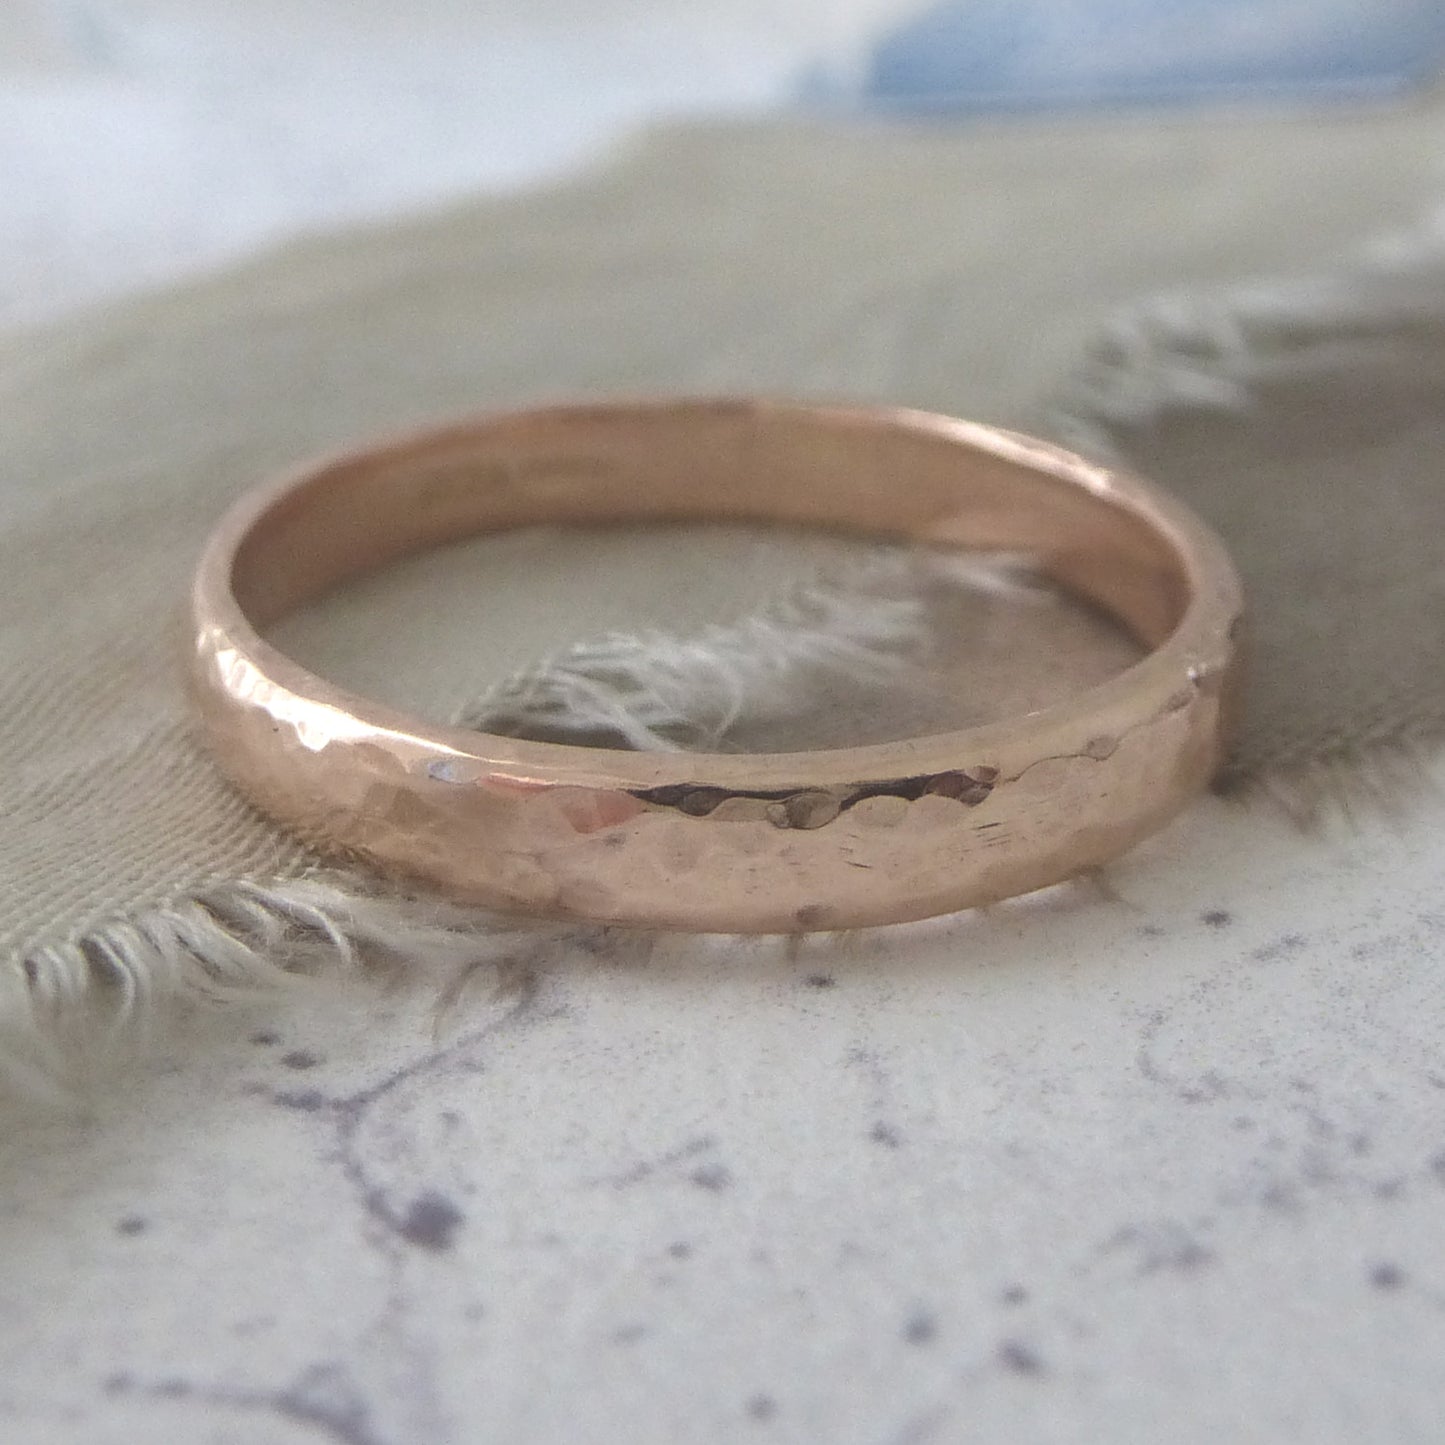 9ct rose gold wedding ring with hammered finish, close up on ribbon and paper background